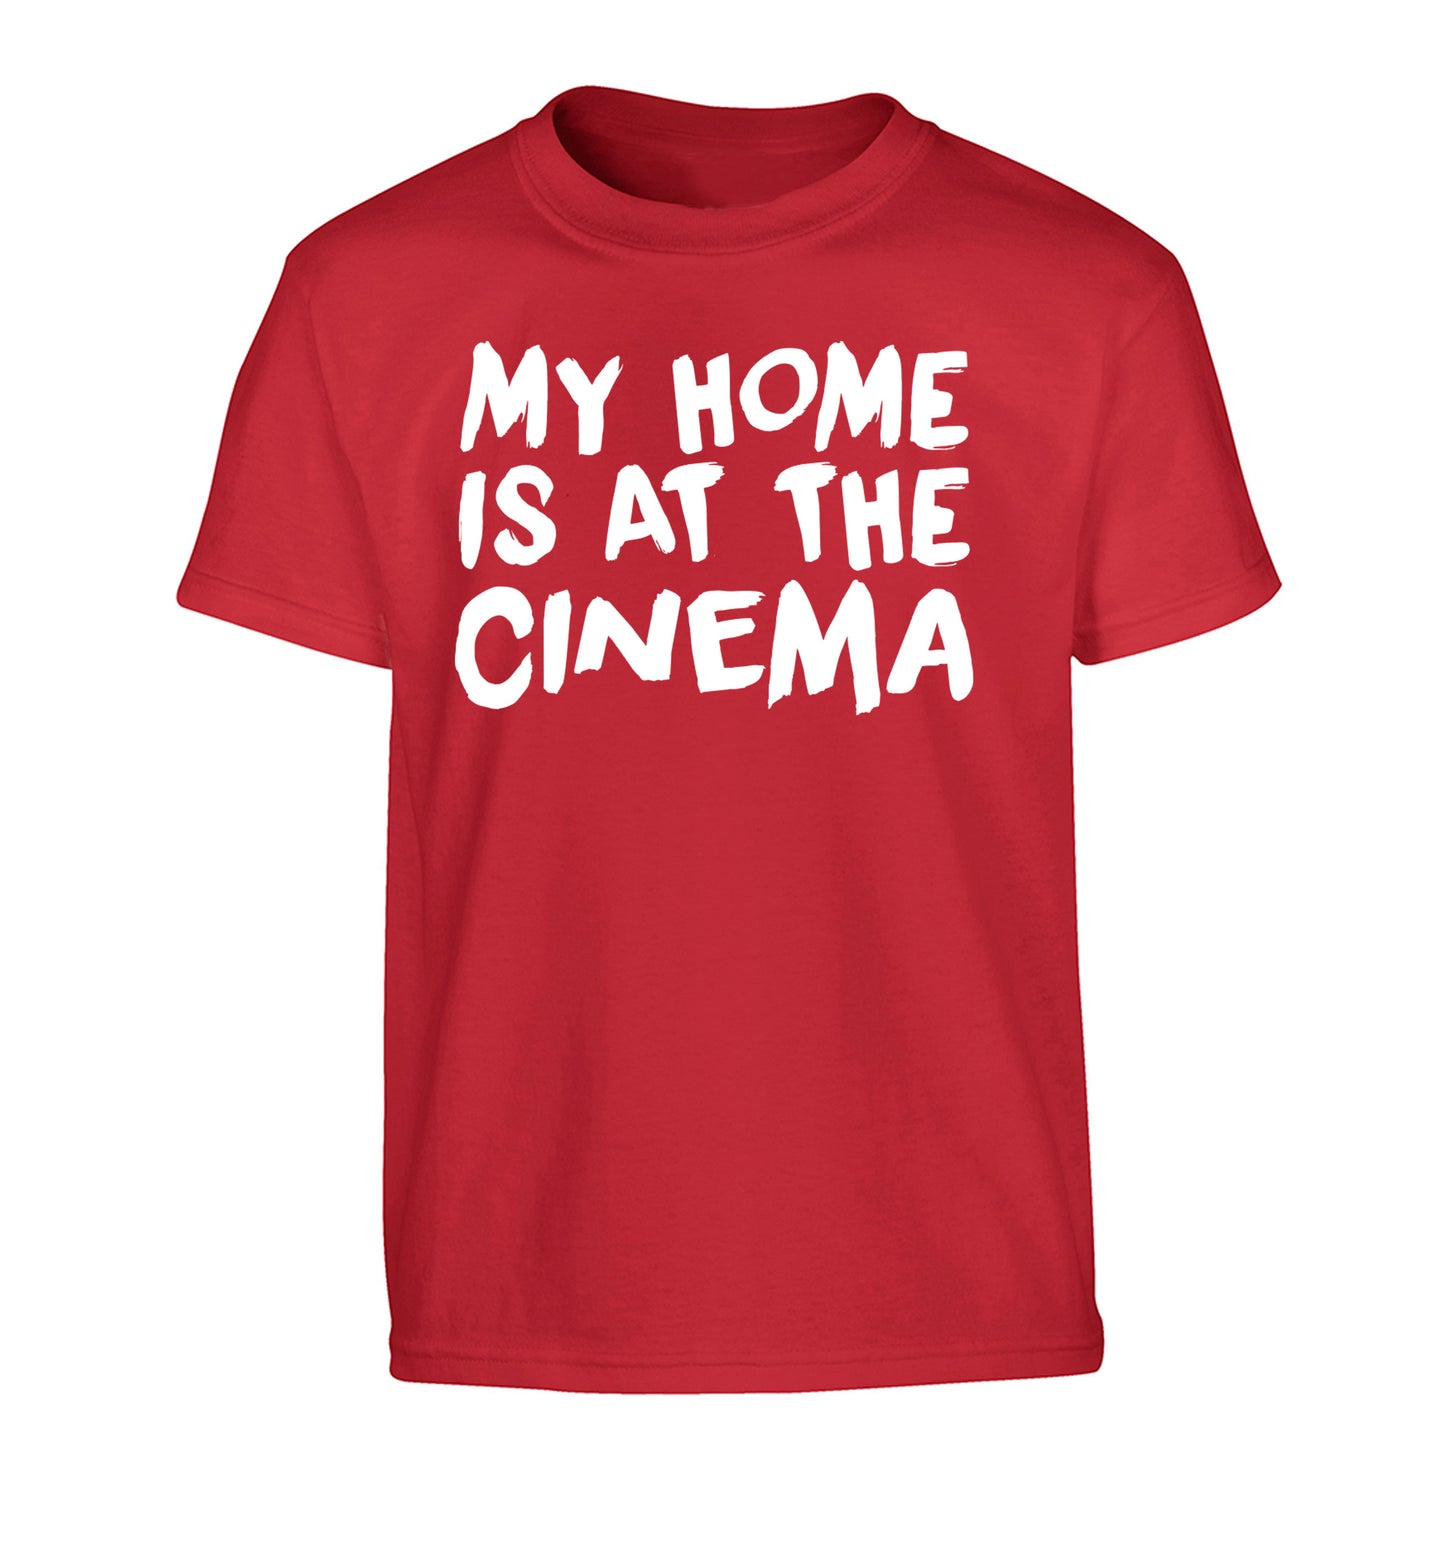 My home is at the cinema Children's red Tshirt 12-14 Years